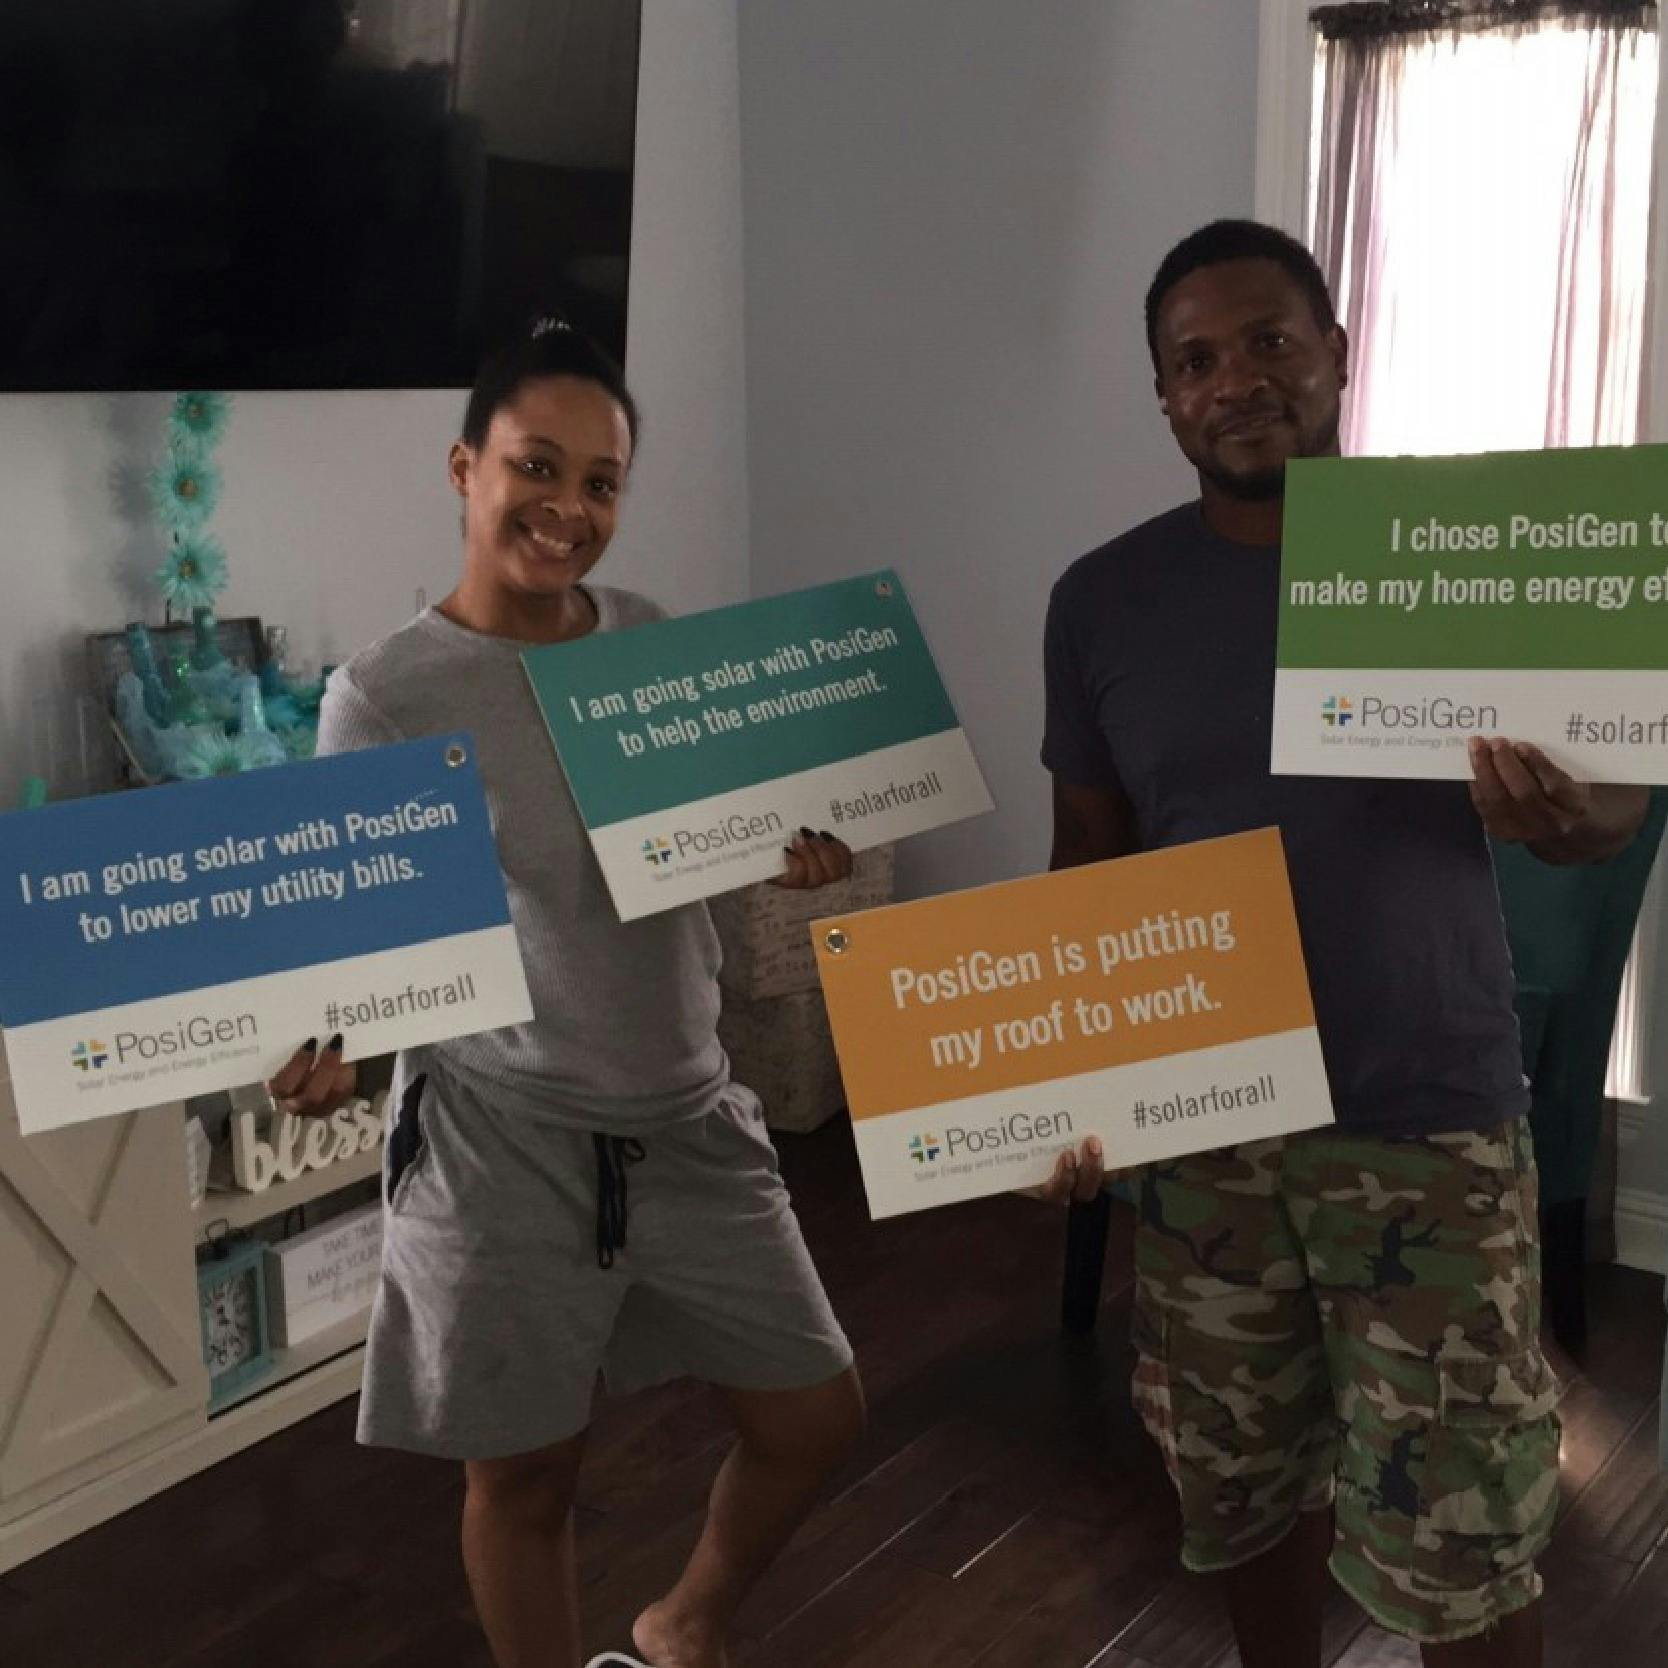 Real customers with 4 reasons why they chose to go solar with PosiGen